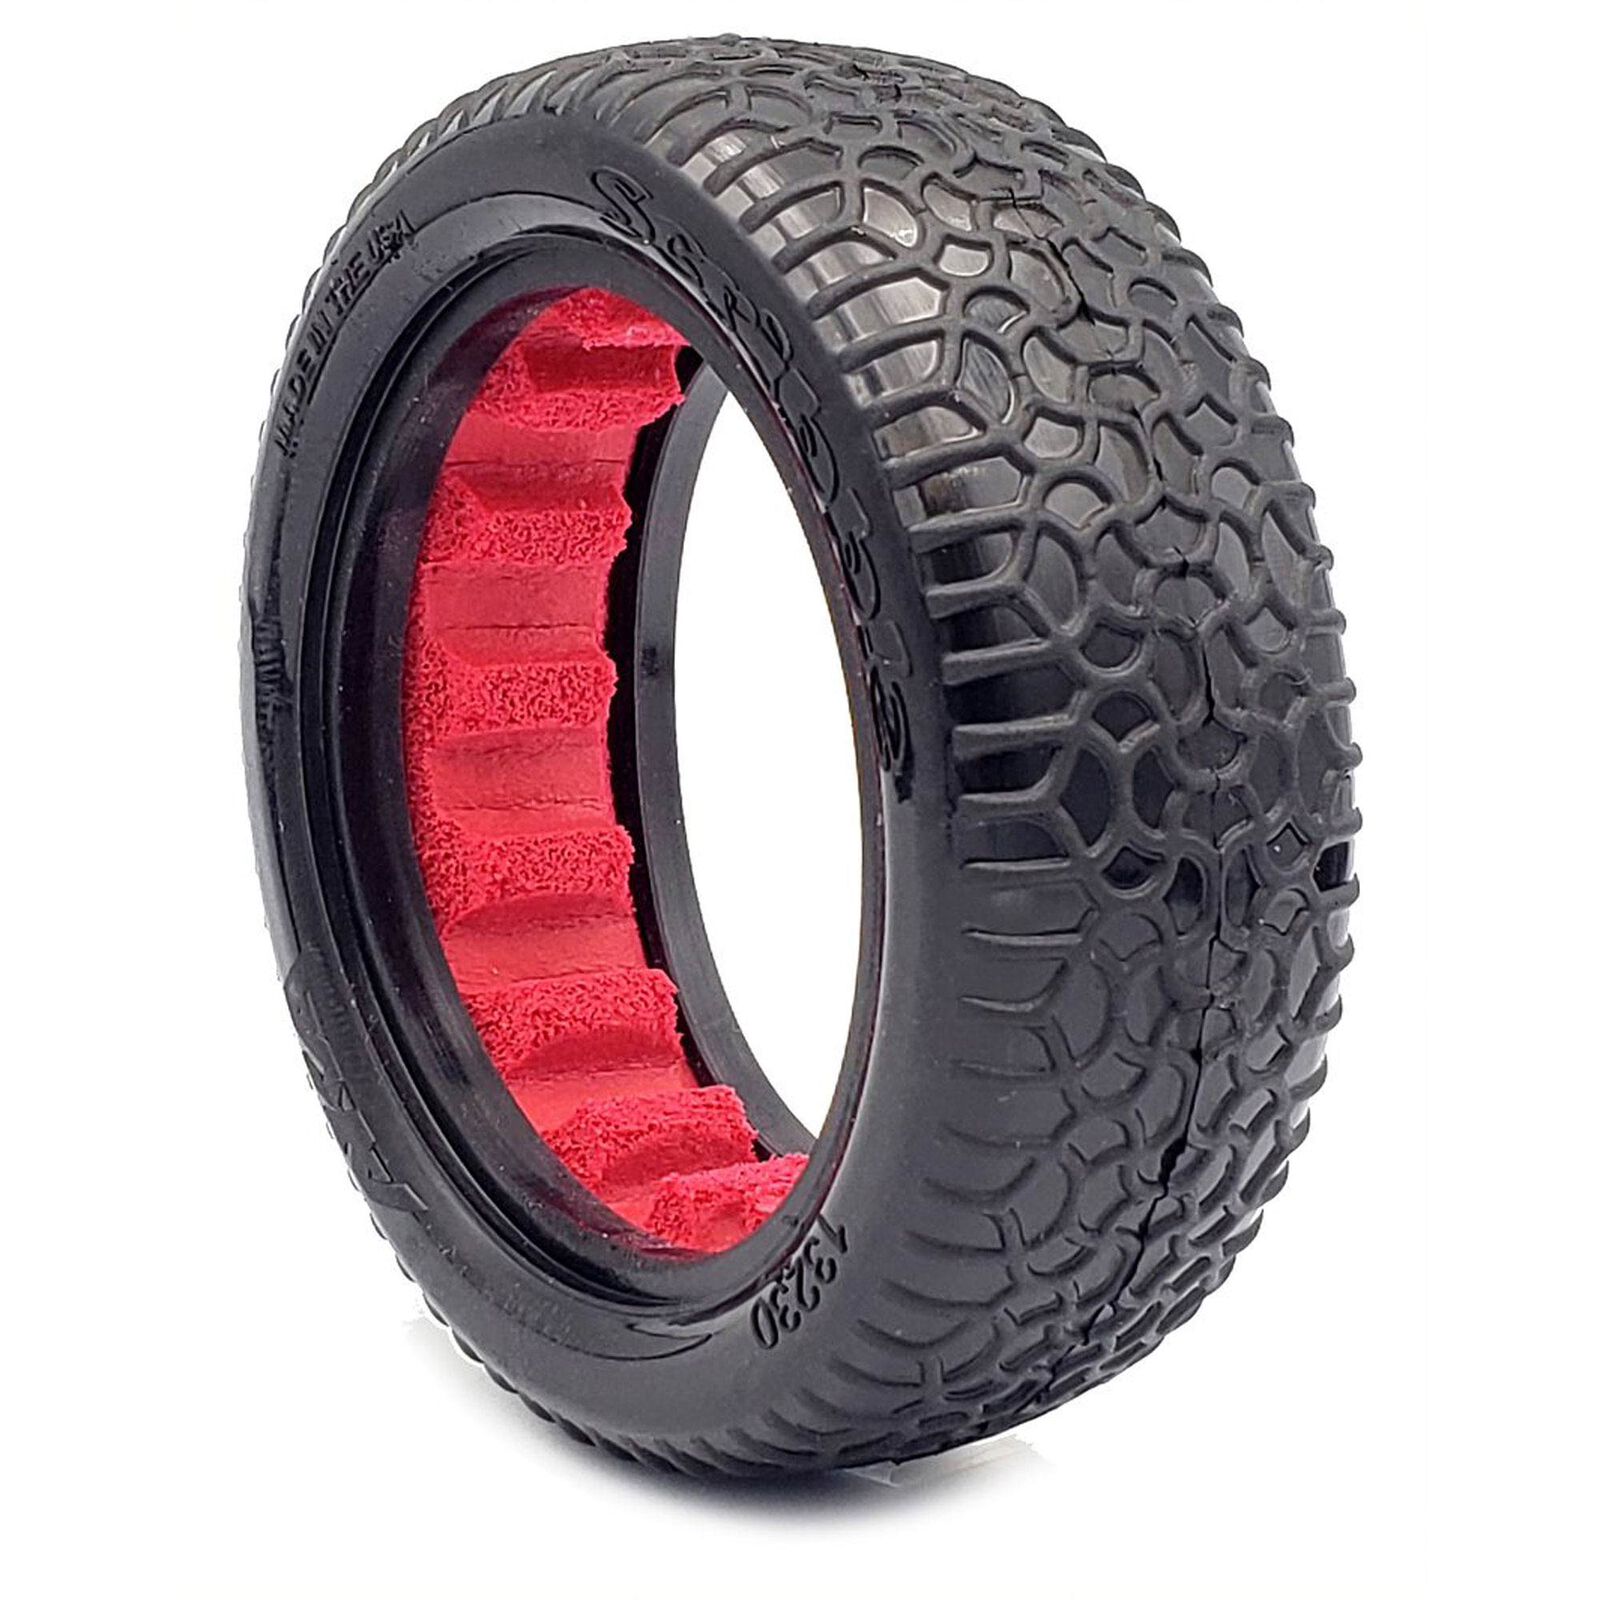 1/10 Scribble Front 2WD 2.2 Tires, Soft Long Wear with Red Inserts (2): Buggy